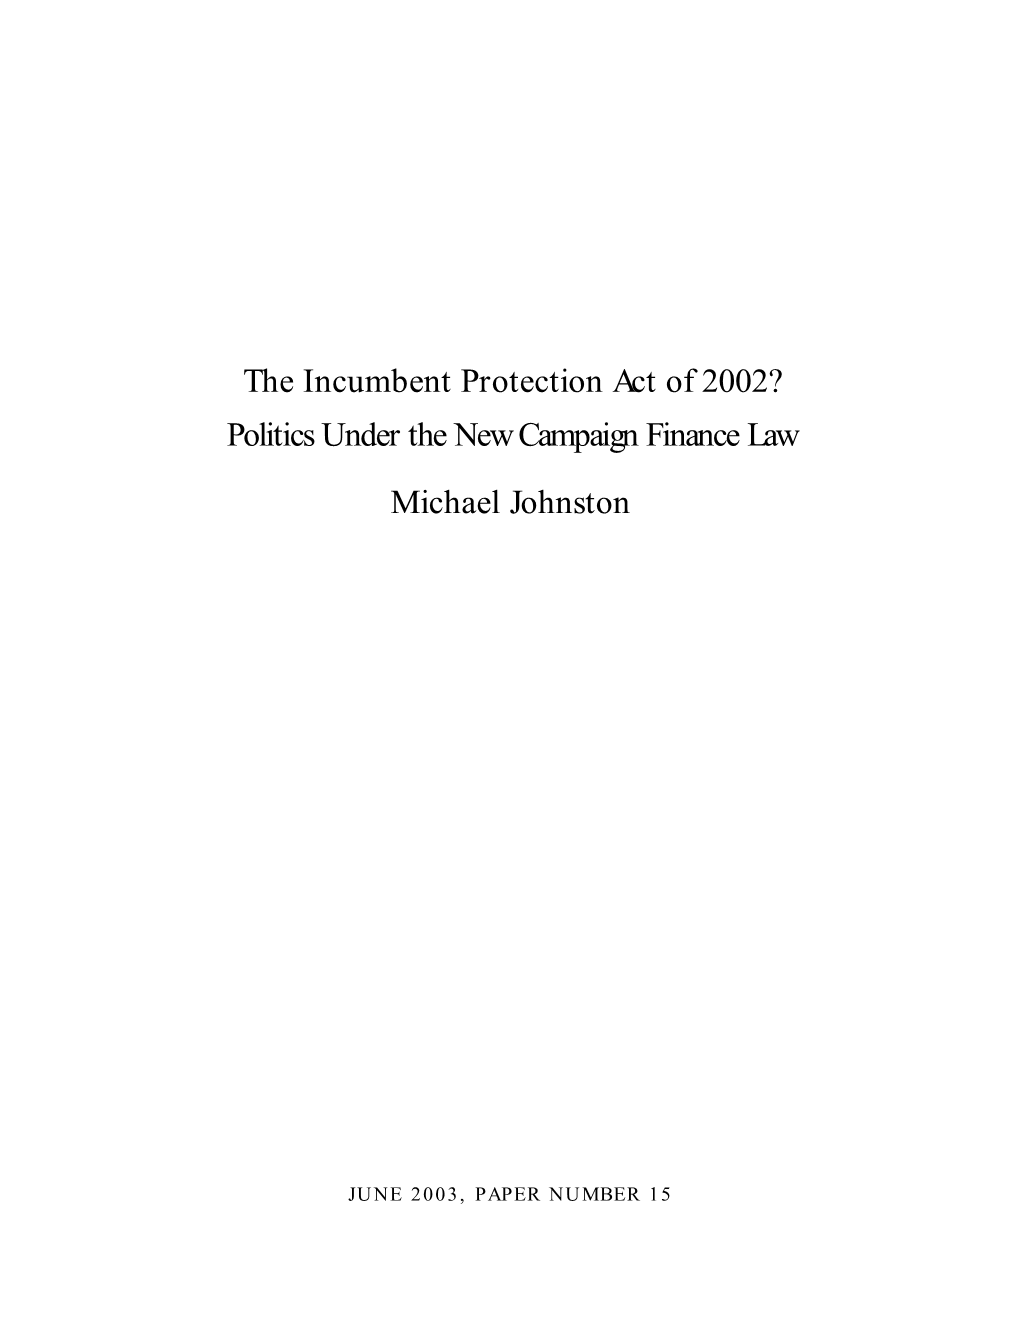 The Incumbent Protection Act of 2002? Politics Under the New Campaign Finance Law